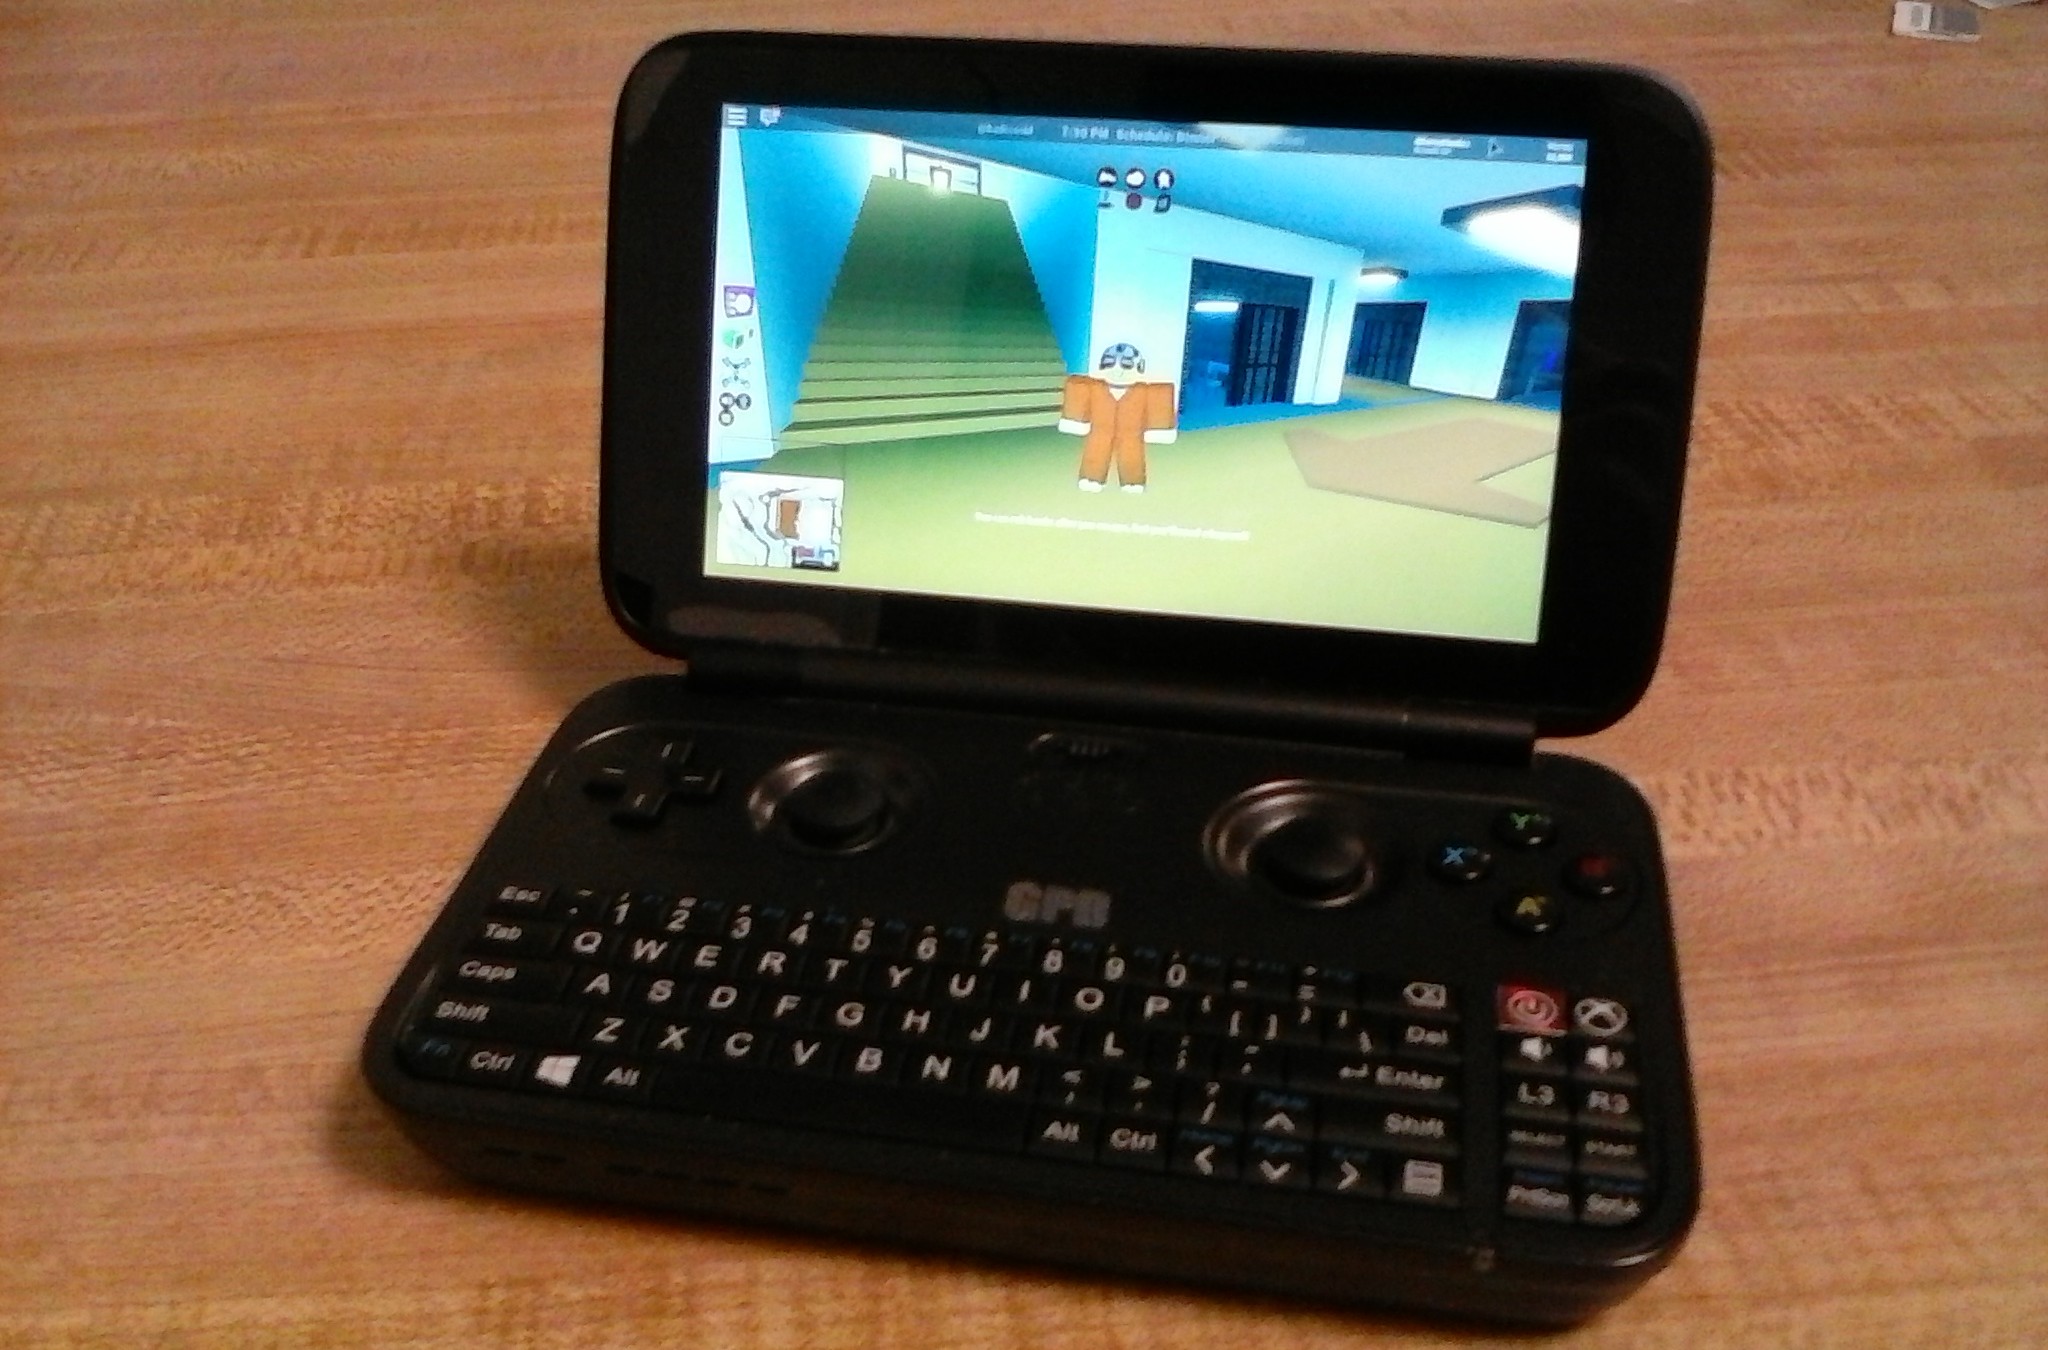 Roblox on a Handheld Console – The GPD Win – ROBLOX Building Guide